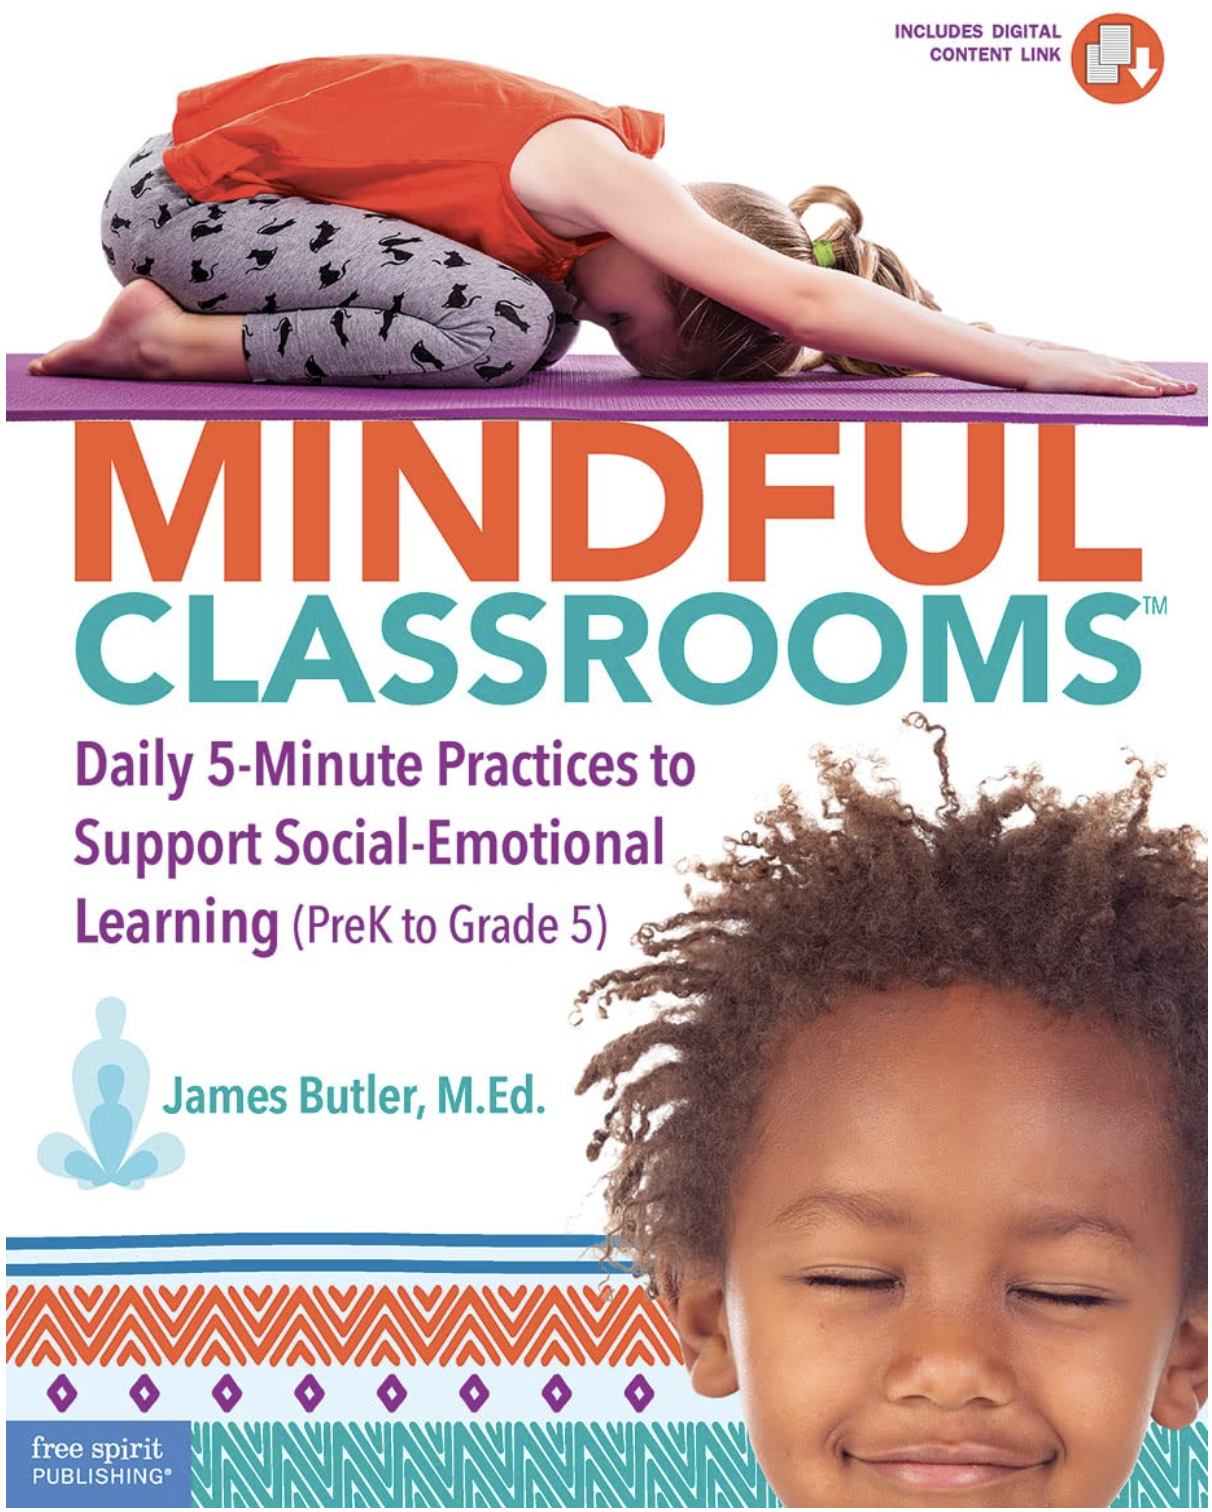 Mindful Classrooms™: Daily 5-Minute Practices to Support Social-Emotional Learning